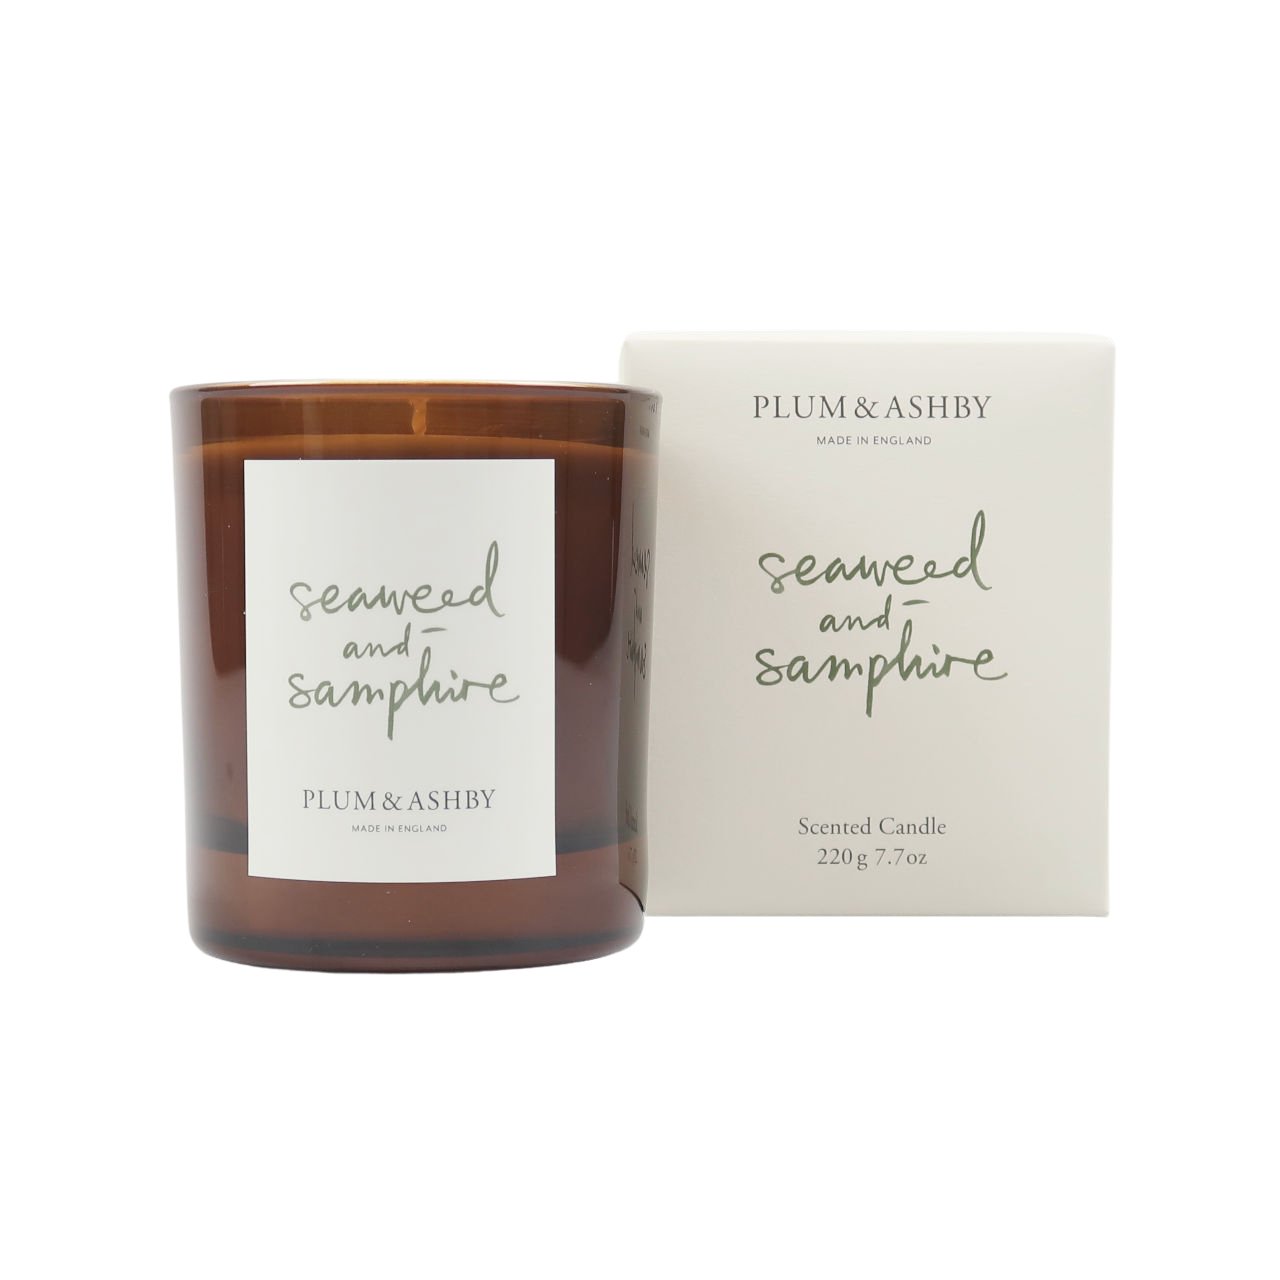 Plum + Ashby Seaweed & Samphire Scented Candle - Large